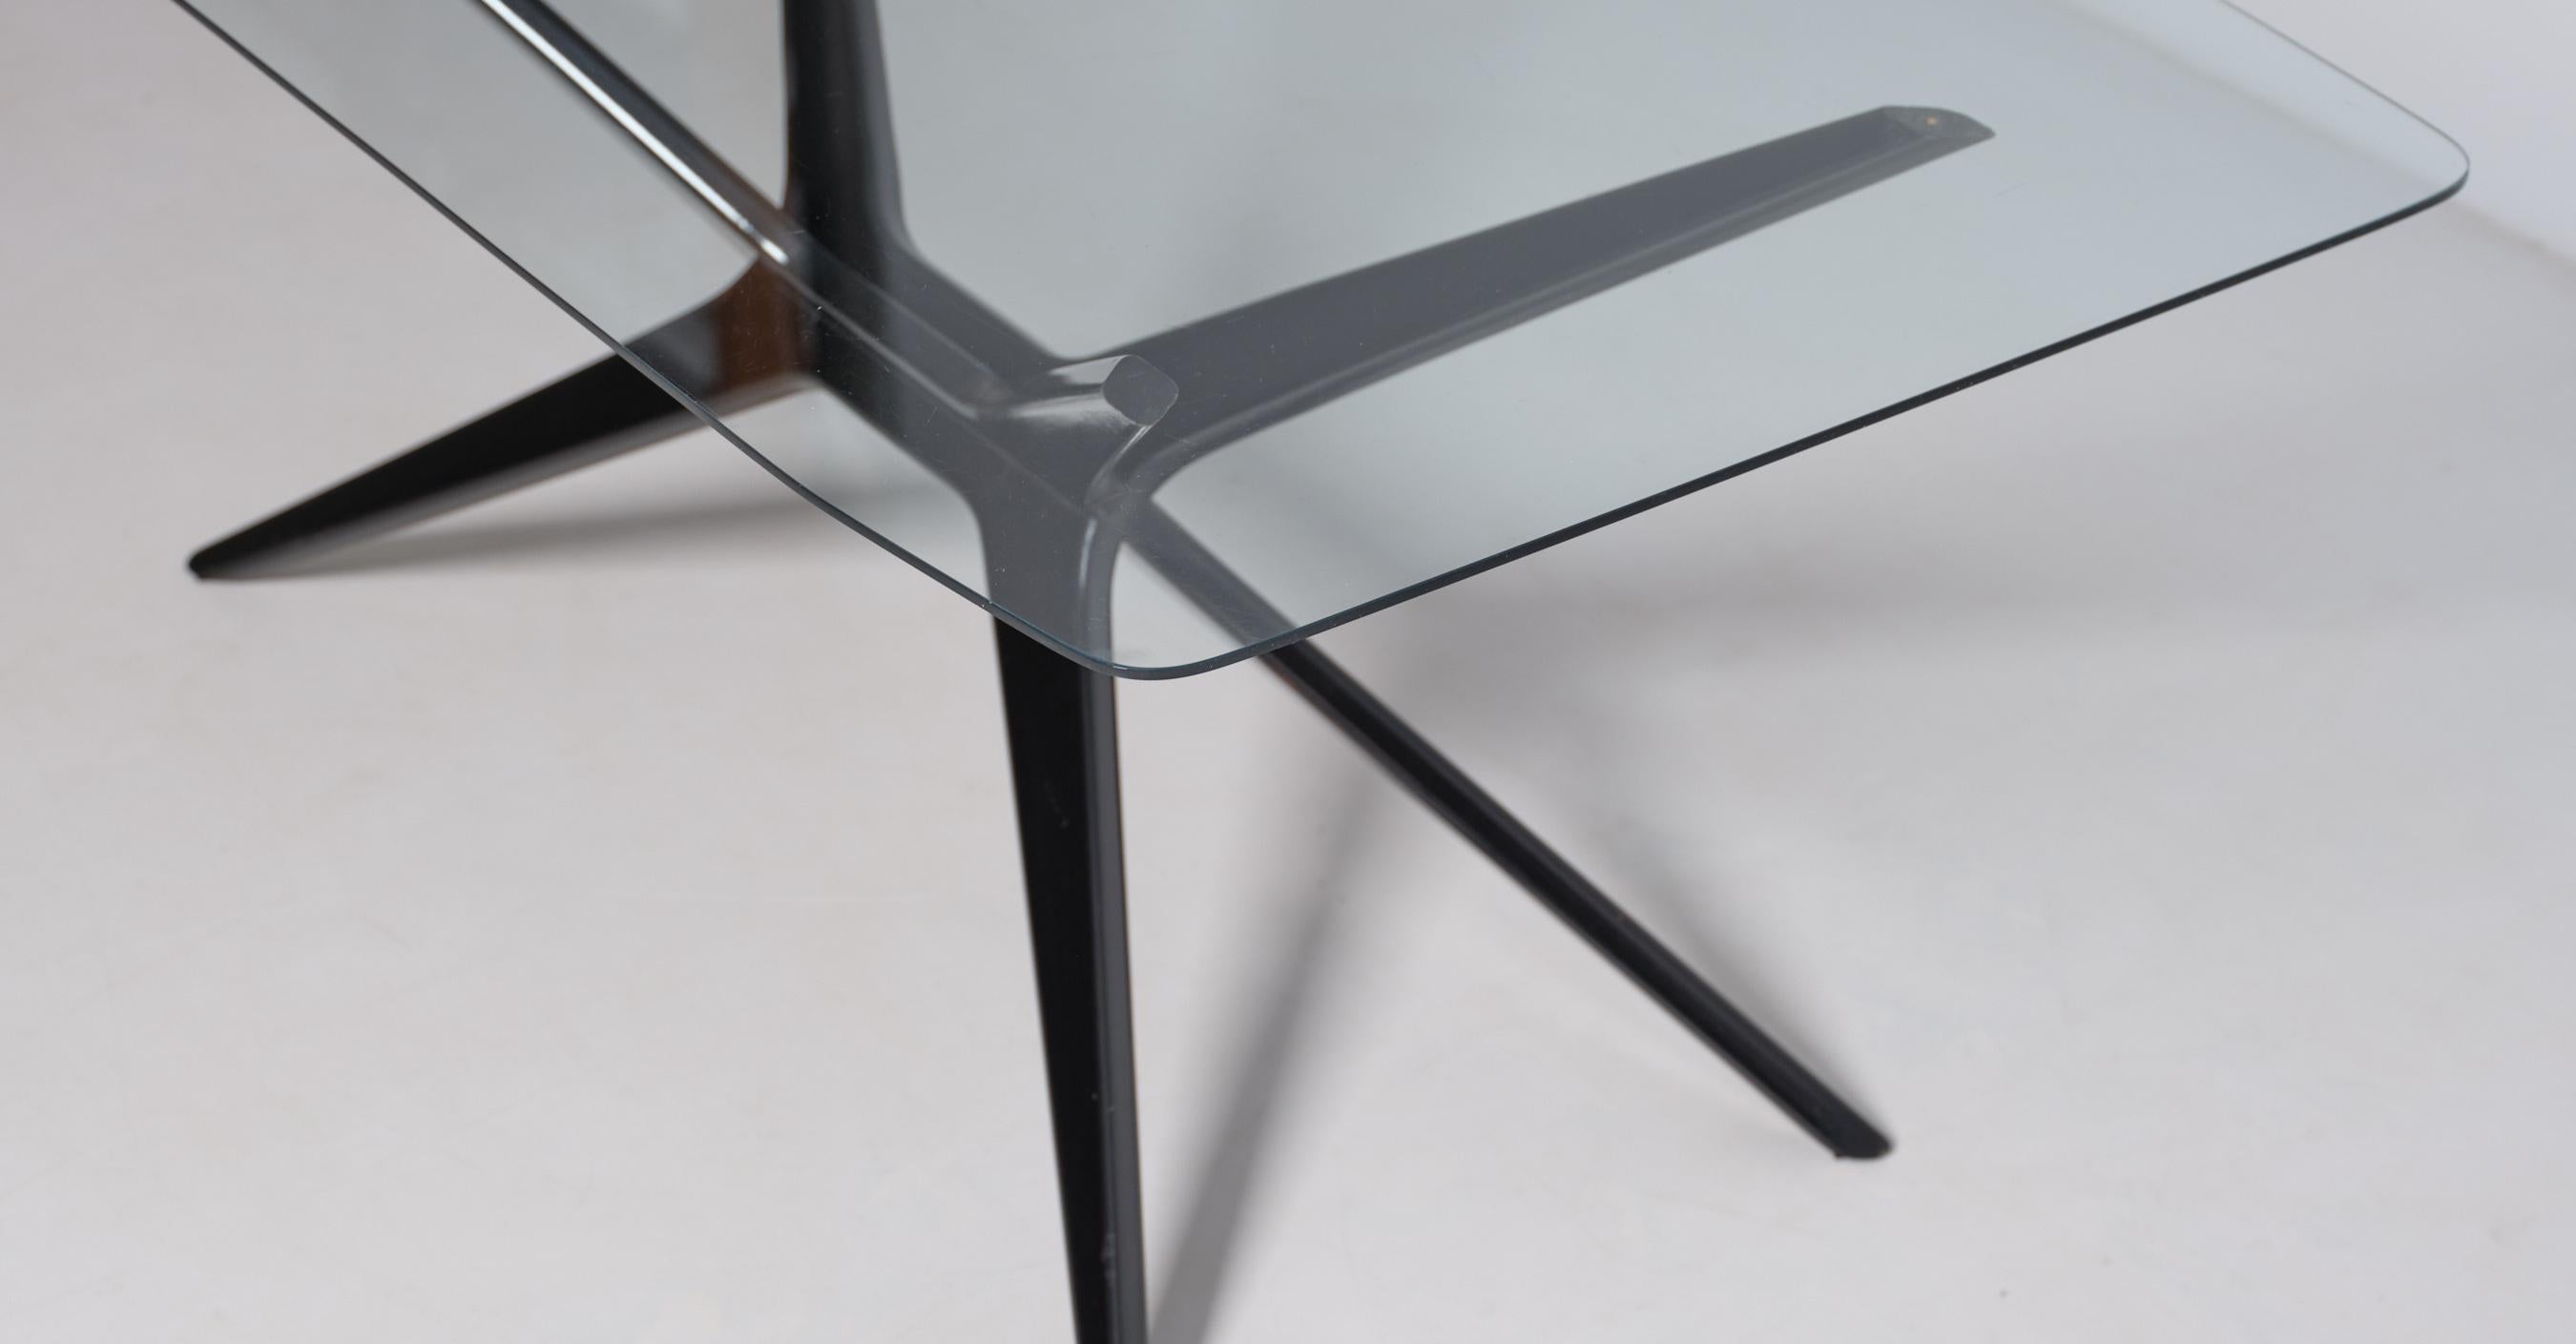 Introducing our exquisite Italian-made coffee table, crafted with the highest level of artisanship. This grand coffee table features a sleek glass top with rounded corners, perfectly blending modern design with timeless elegance. The table stands on